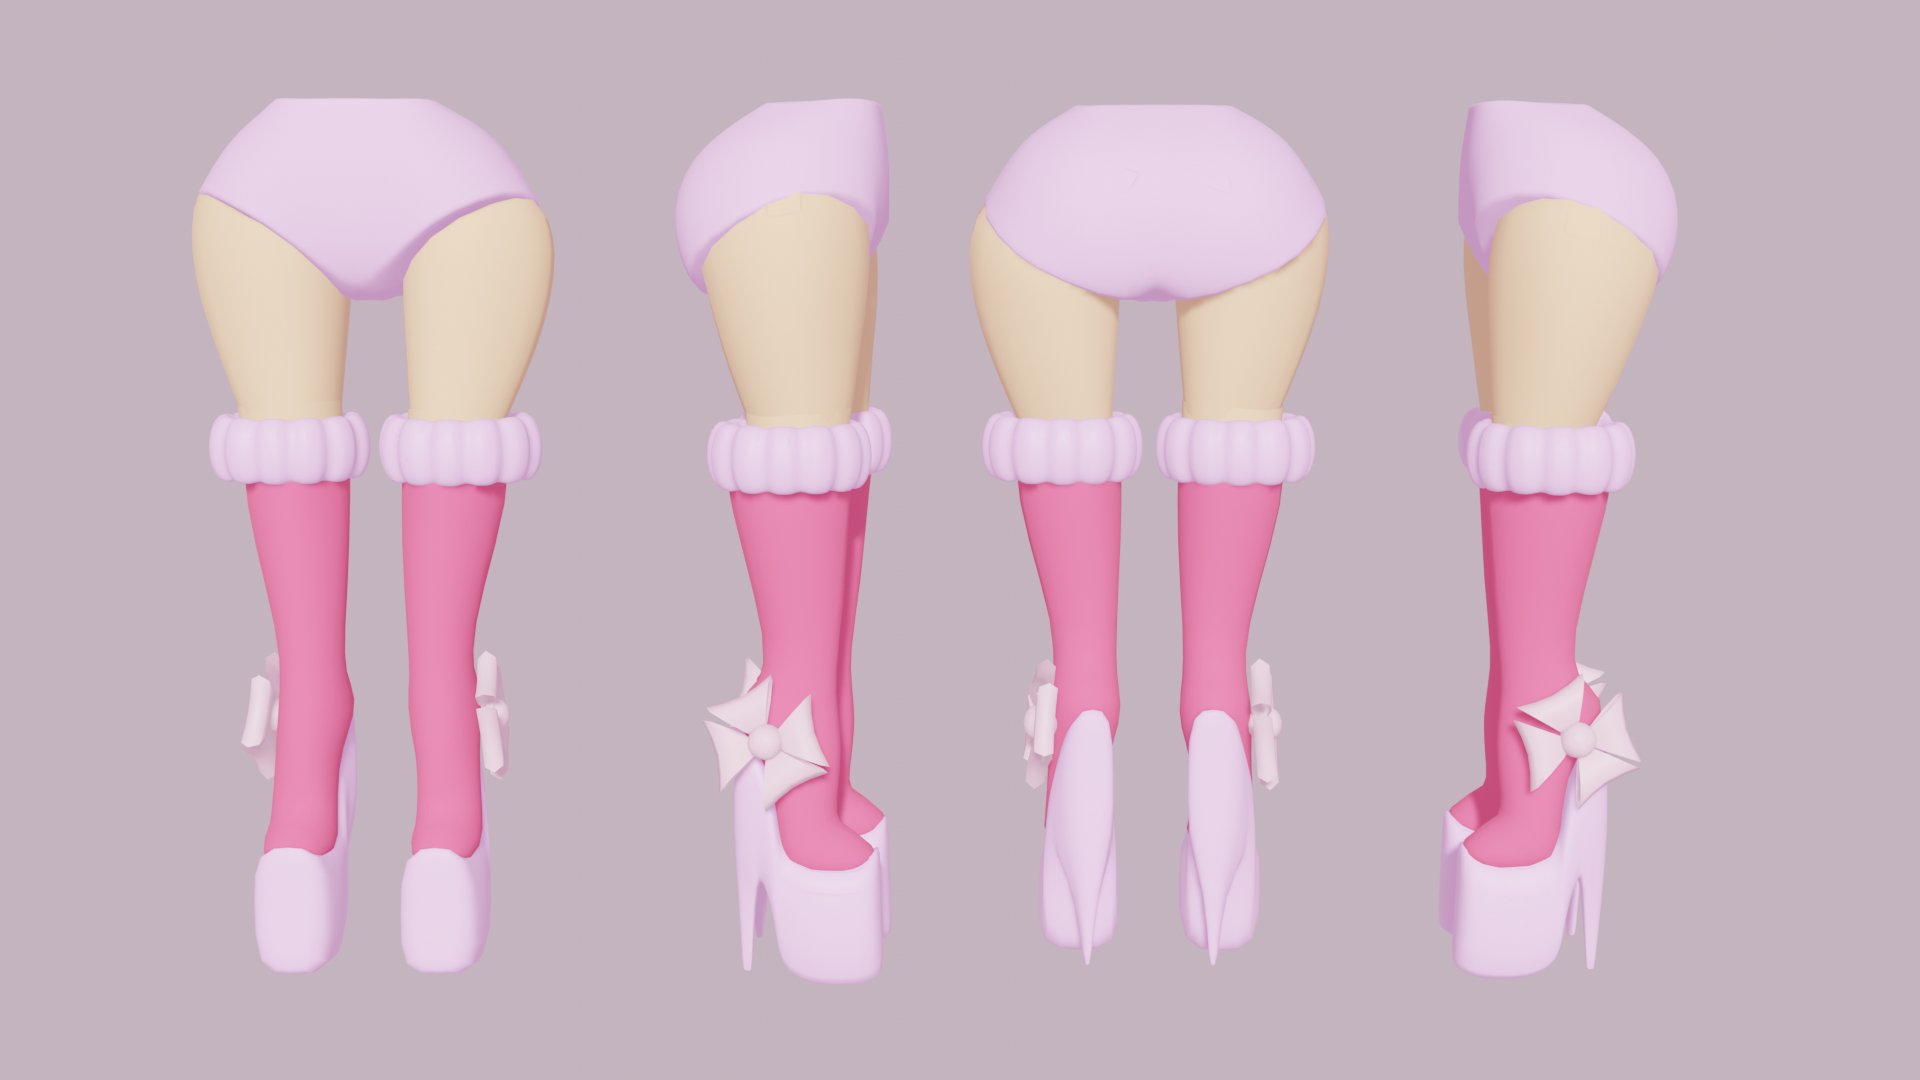 Rose on Twitter: "❄️Thigh High Princess Ice Boots Remake❄️ I am attempting  to make a lot of different shoes/heels styles so I am remaking items from royale  high to practice.Hope you all